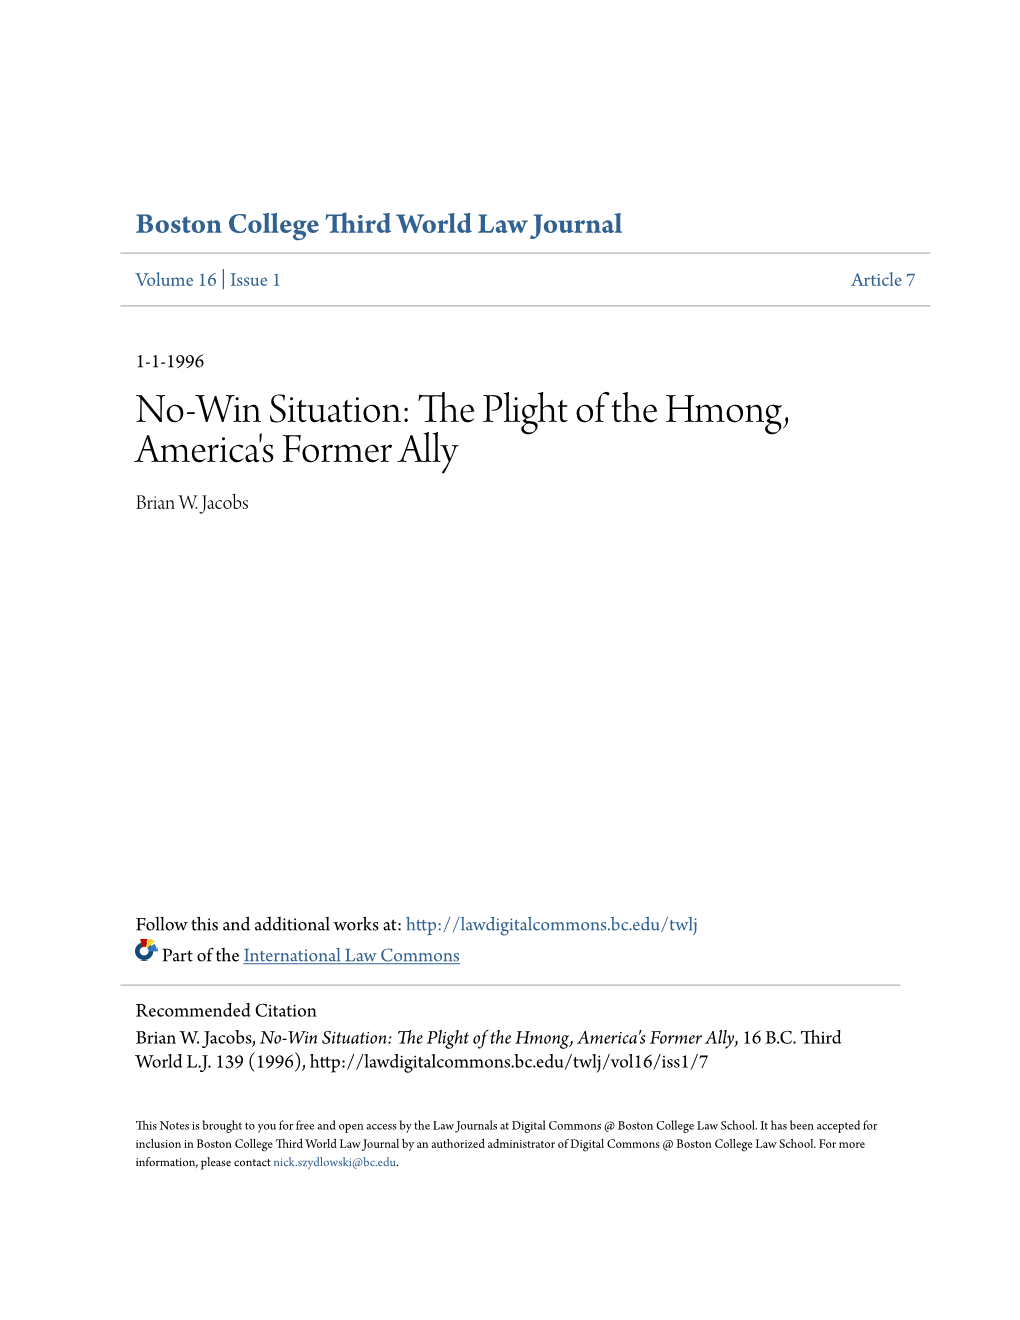 No-Win Situation: the Plight of the Hmong, America's Former Ally, 16 B.C